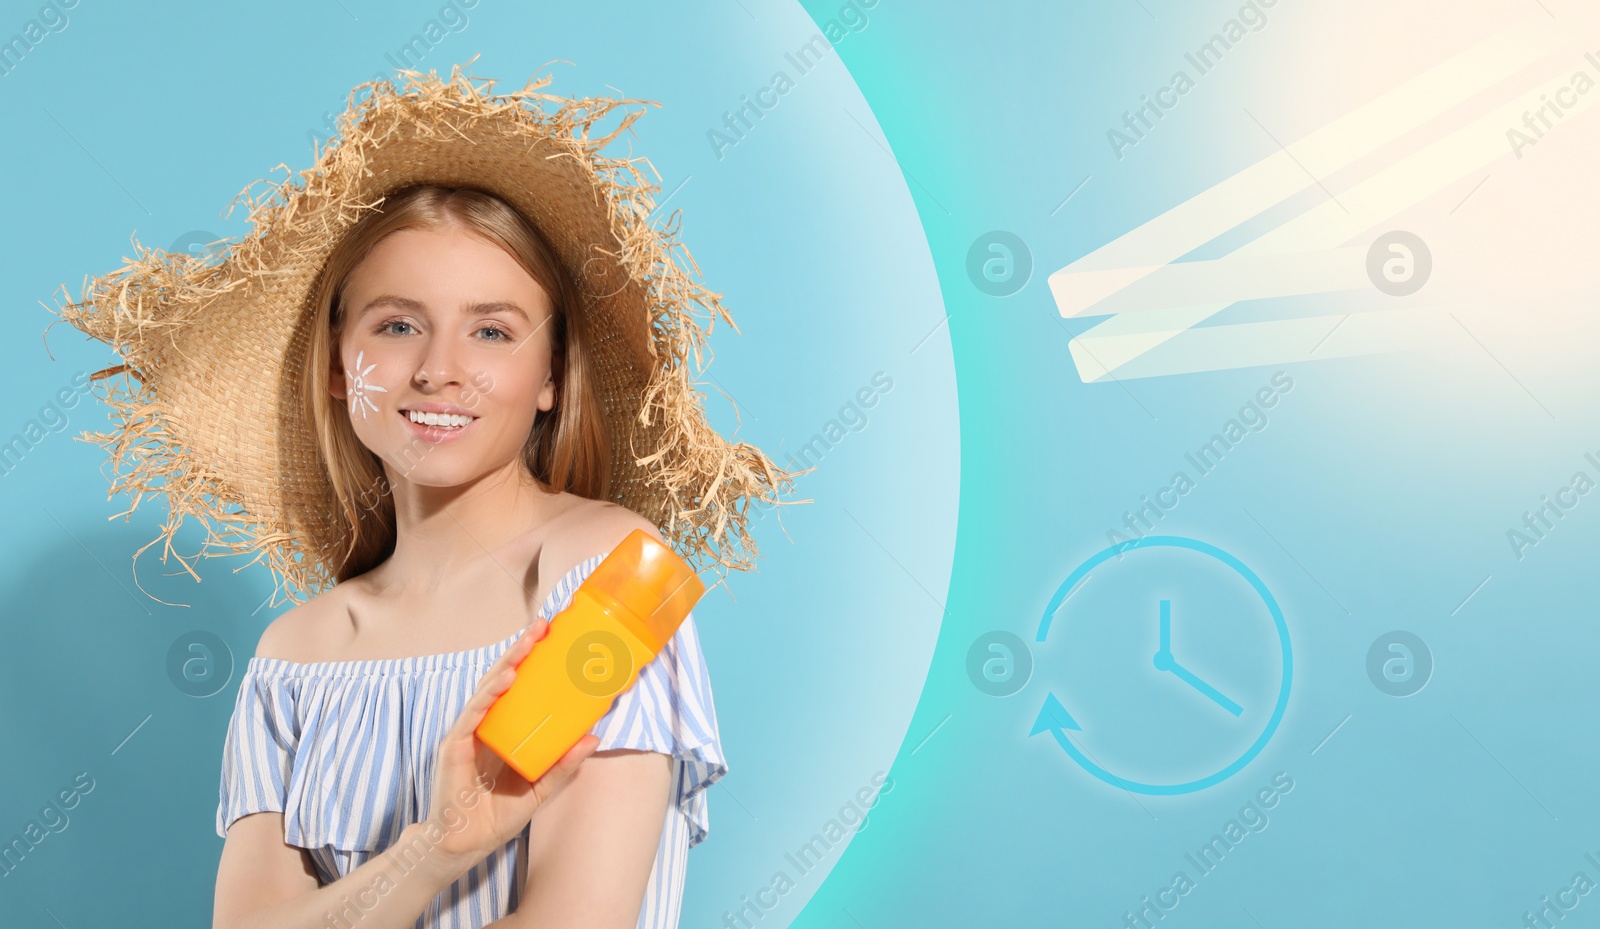 Image of Sun protection product as barrier against ultraviolet, banner design. Beautiful young woman in straw hat with sunscreen against light blue background